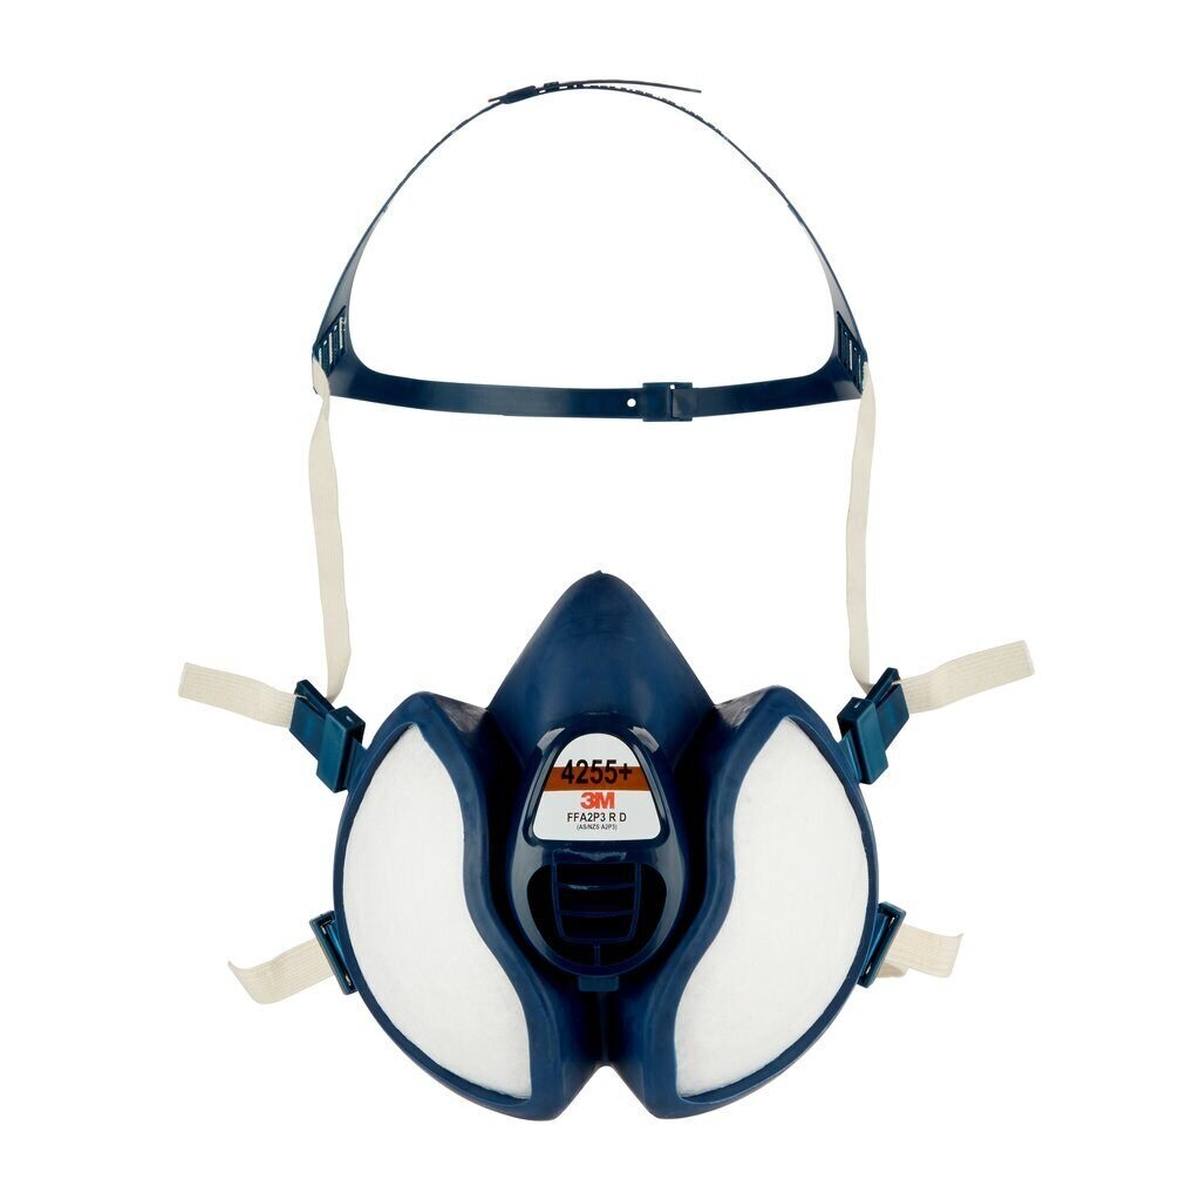 3M 4277+ respirator FFABE1P3RD against organic, inorganic and acid gases and vapors such as SO2 and HCI as well as particles up to 30 times the limit value